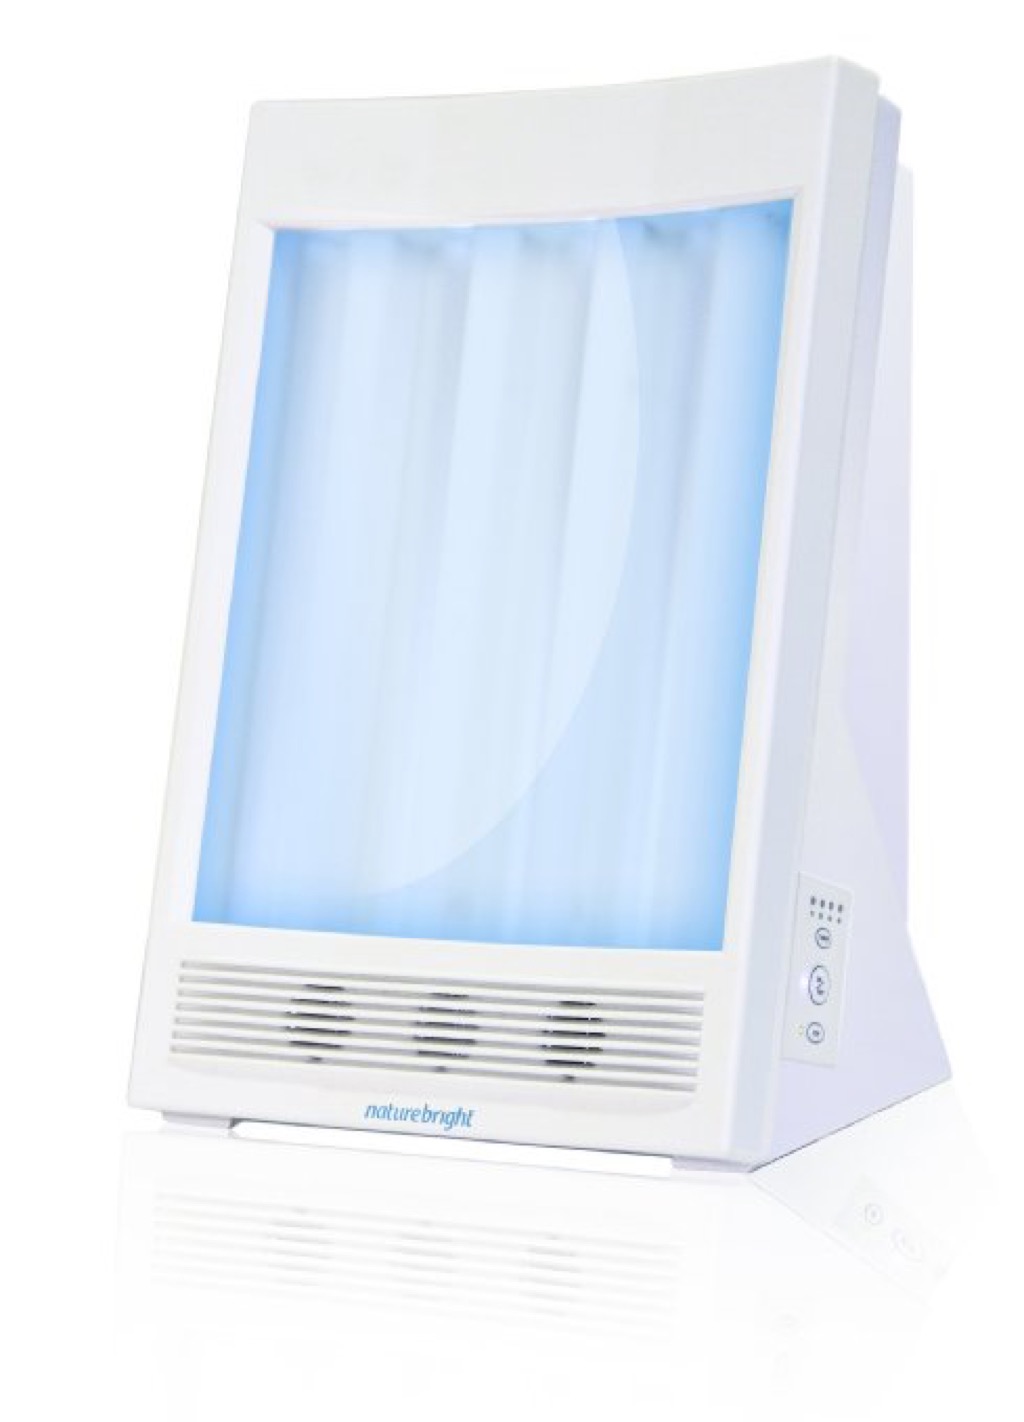 blue light therapy, which will make you instantly happy.